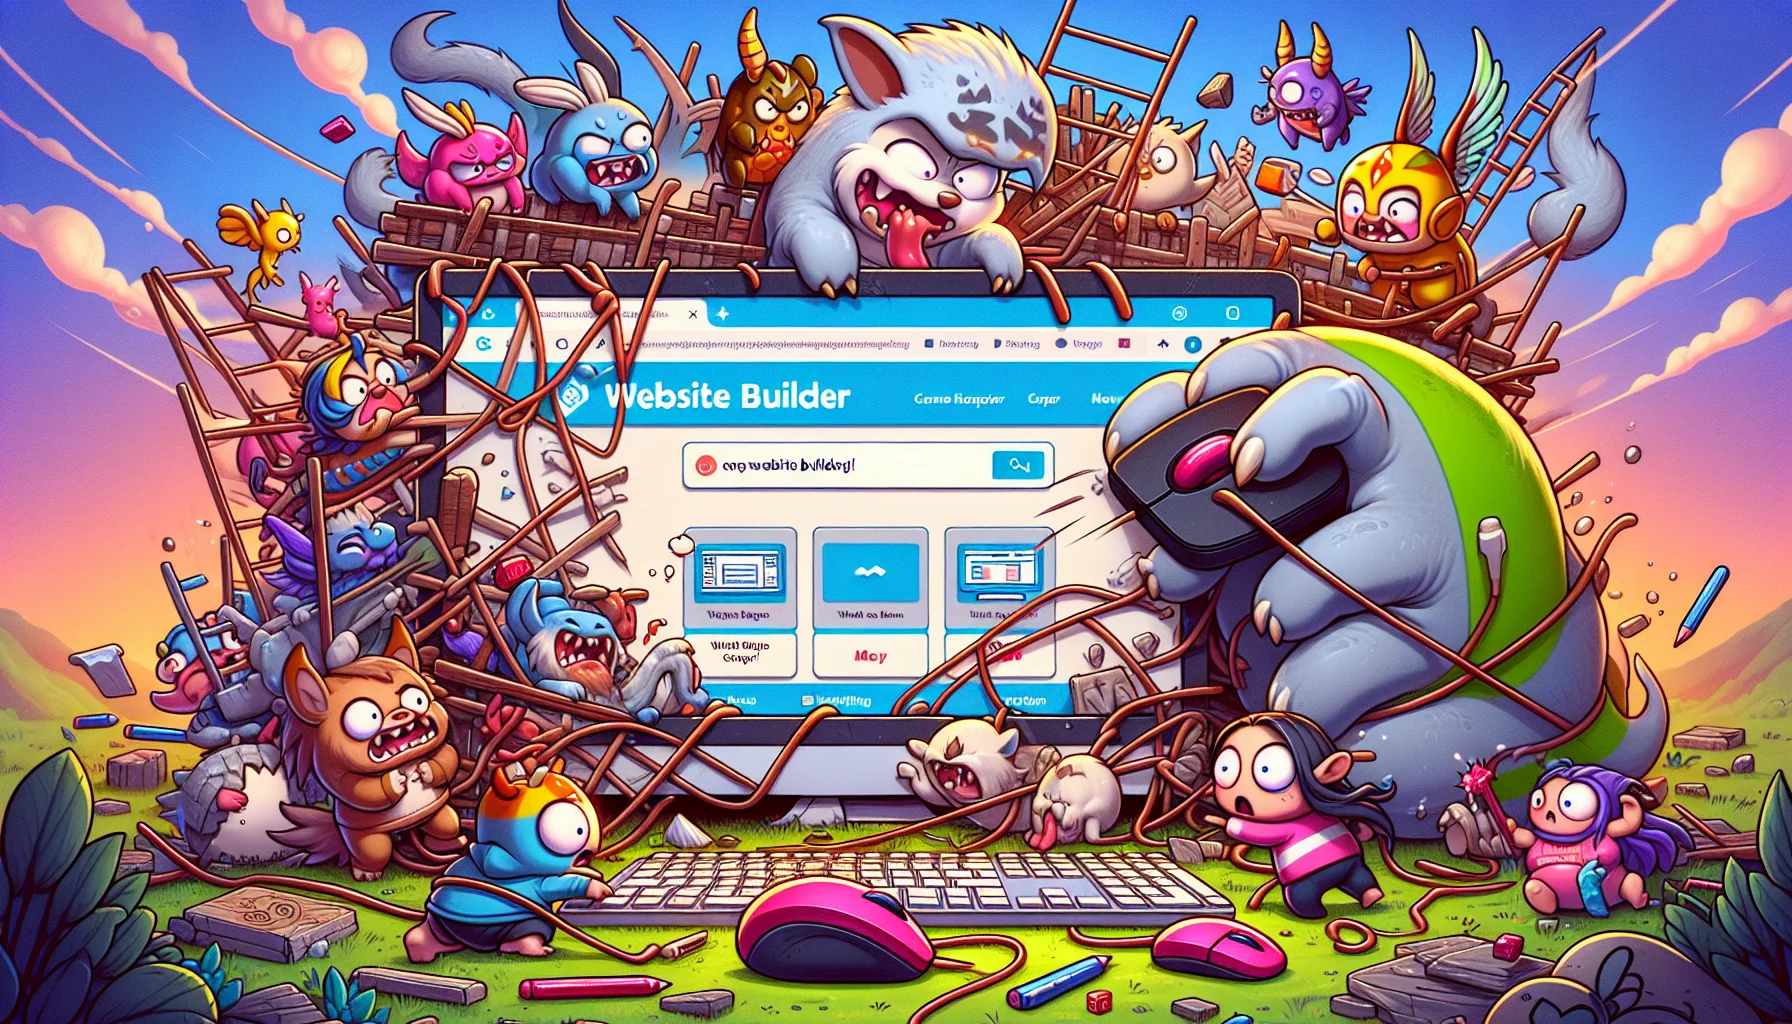 Show an amusing scenario where cute and colorful cartoon characters are designing a website. The characters might look like a mix of animals and mythical creatures. They're clumsily trying to maneuver around oversized tech items - a giant computer mouse, keyboard and screen. The screen displays a generic website builder (avoiding specific brand names), meant to be a funny yet enticing representation of one-stop web hosting solutions. The scene is filled with action and humor - characters slipping on keys, wrestling with tangled wires, or frantically typing away. The background shows a fantasy world with a mixture of modern and medieval elements.